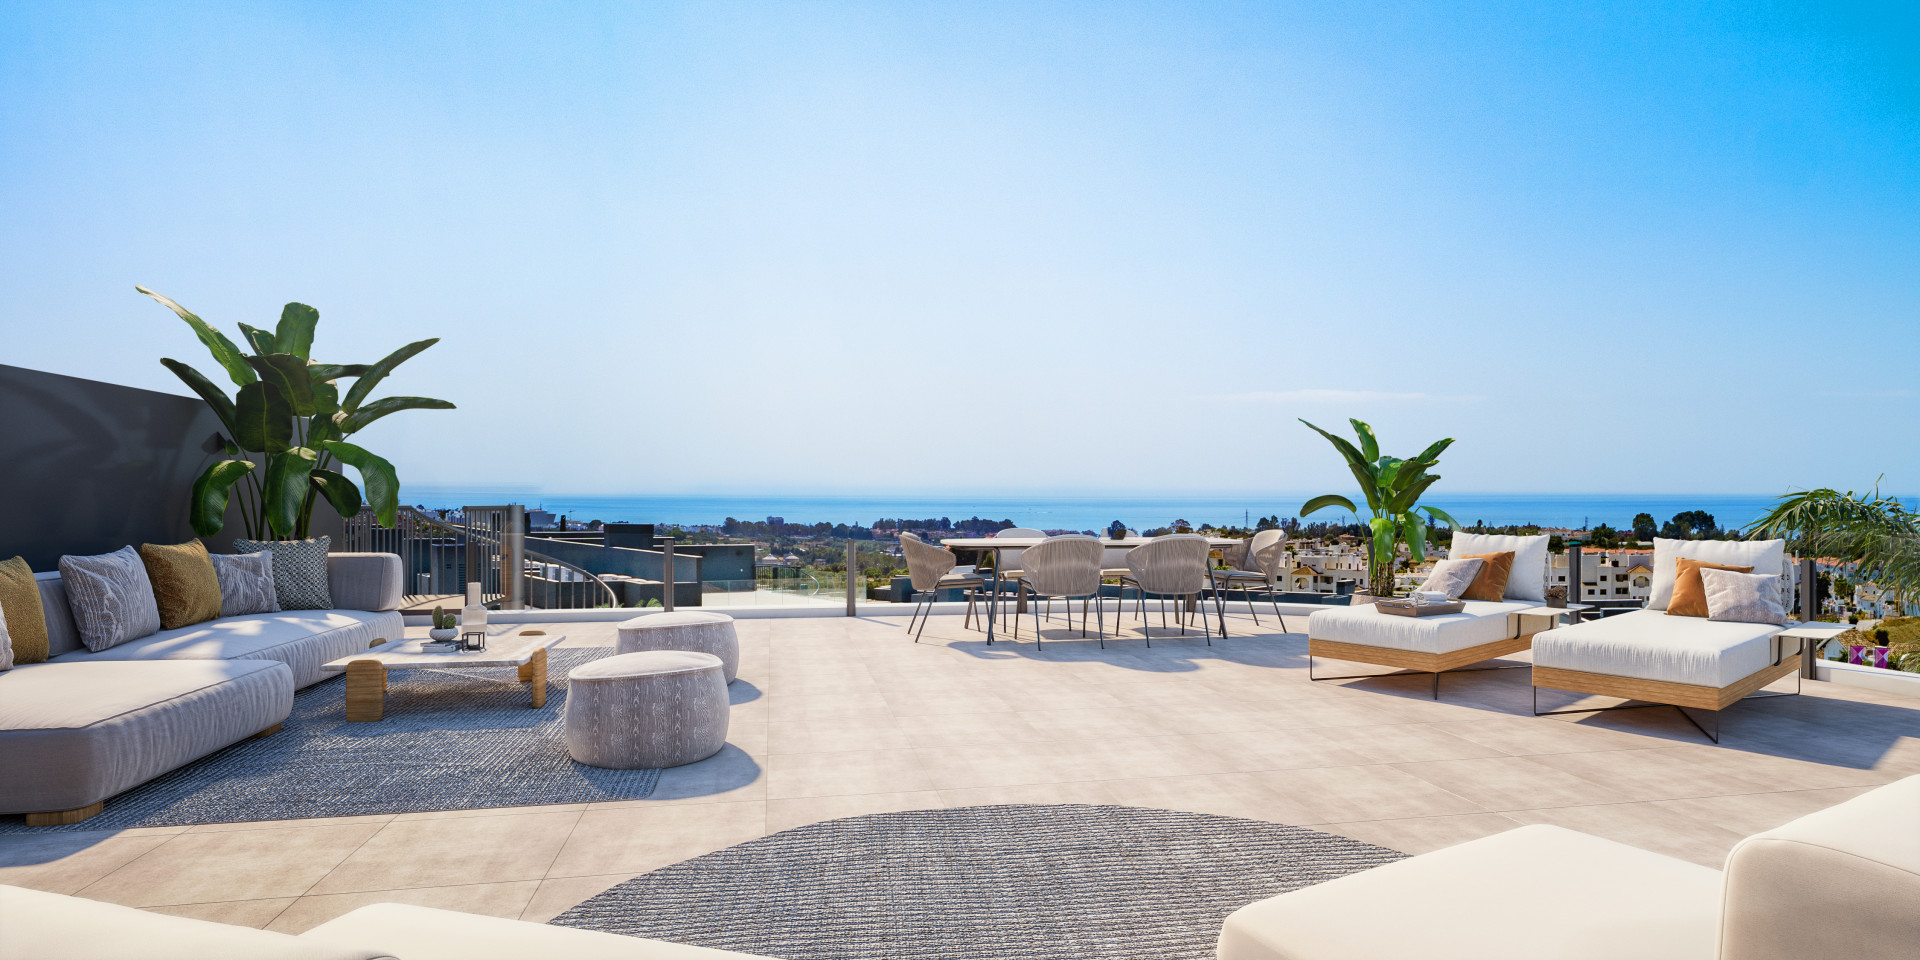 Apartments and penthouses with expansive terraces designed to be bright